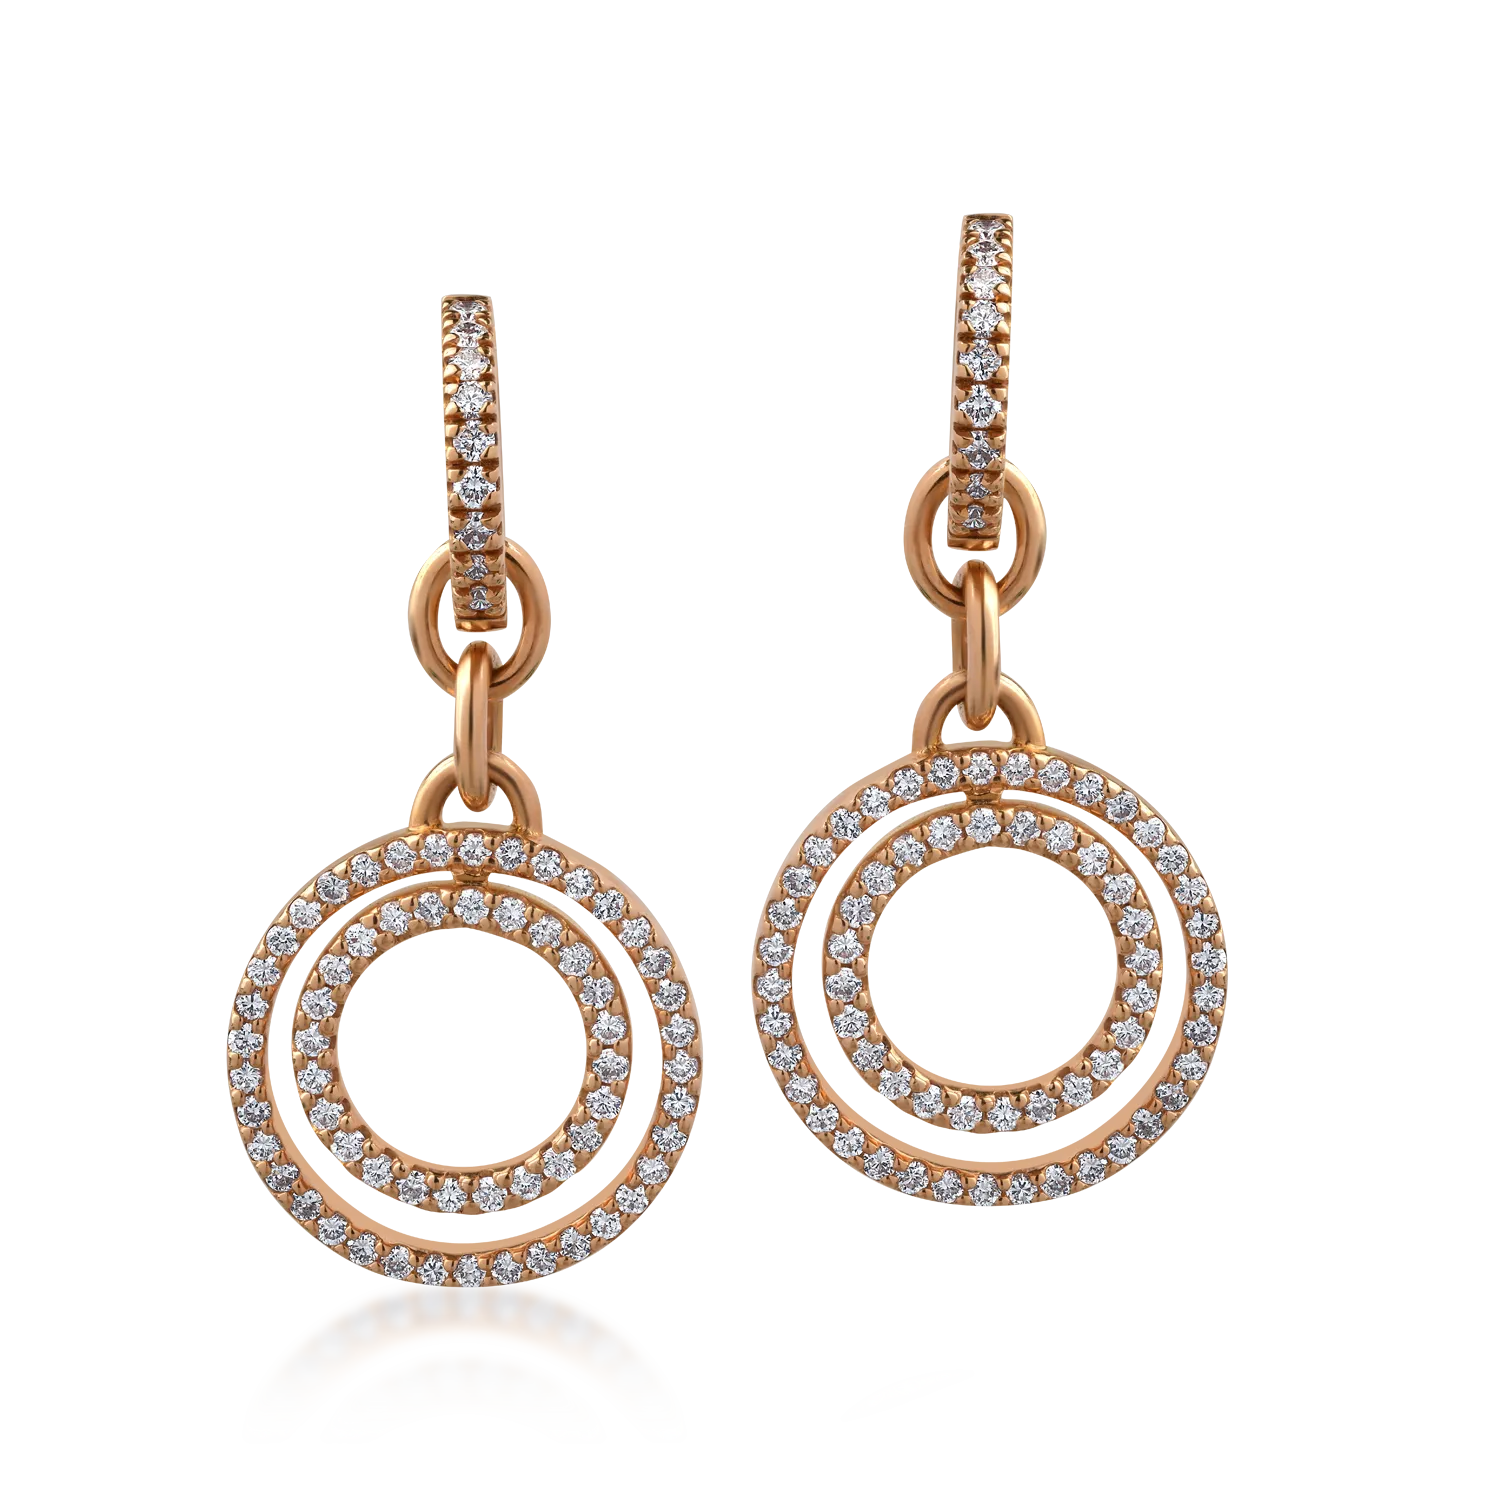 18K rose gold earrings with 1.56ct diamonds